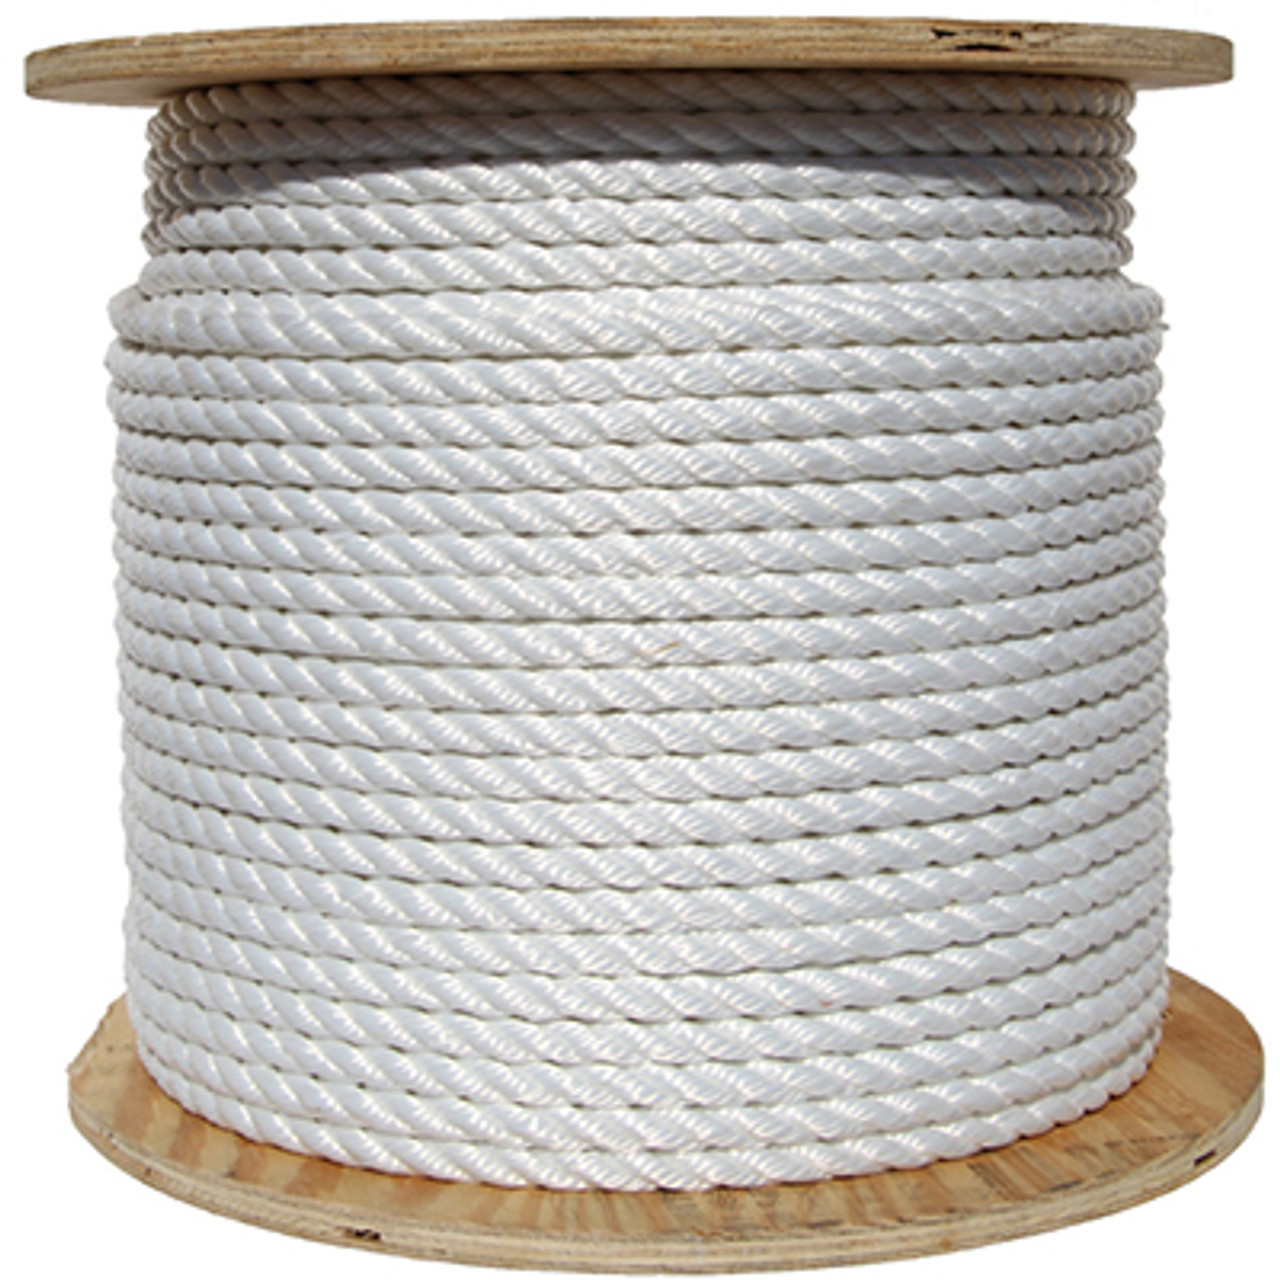 3/8 Inch Flagpole Rope Spool (1000 ft), no wire center